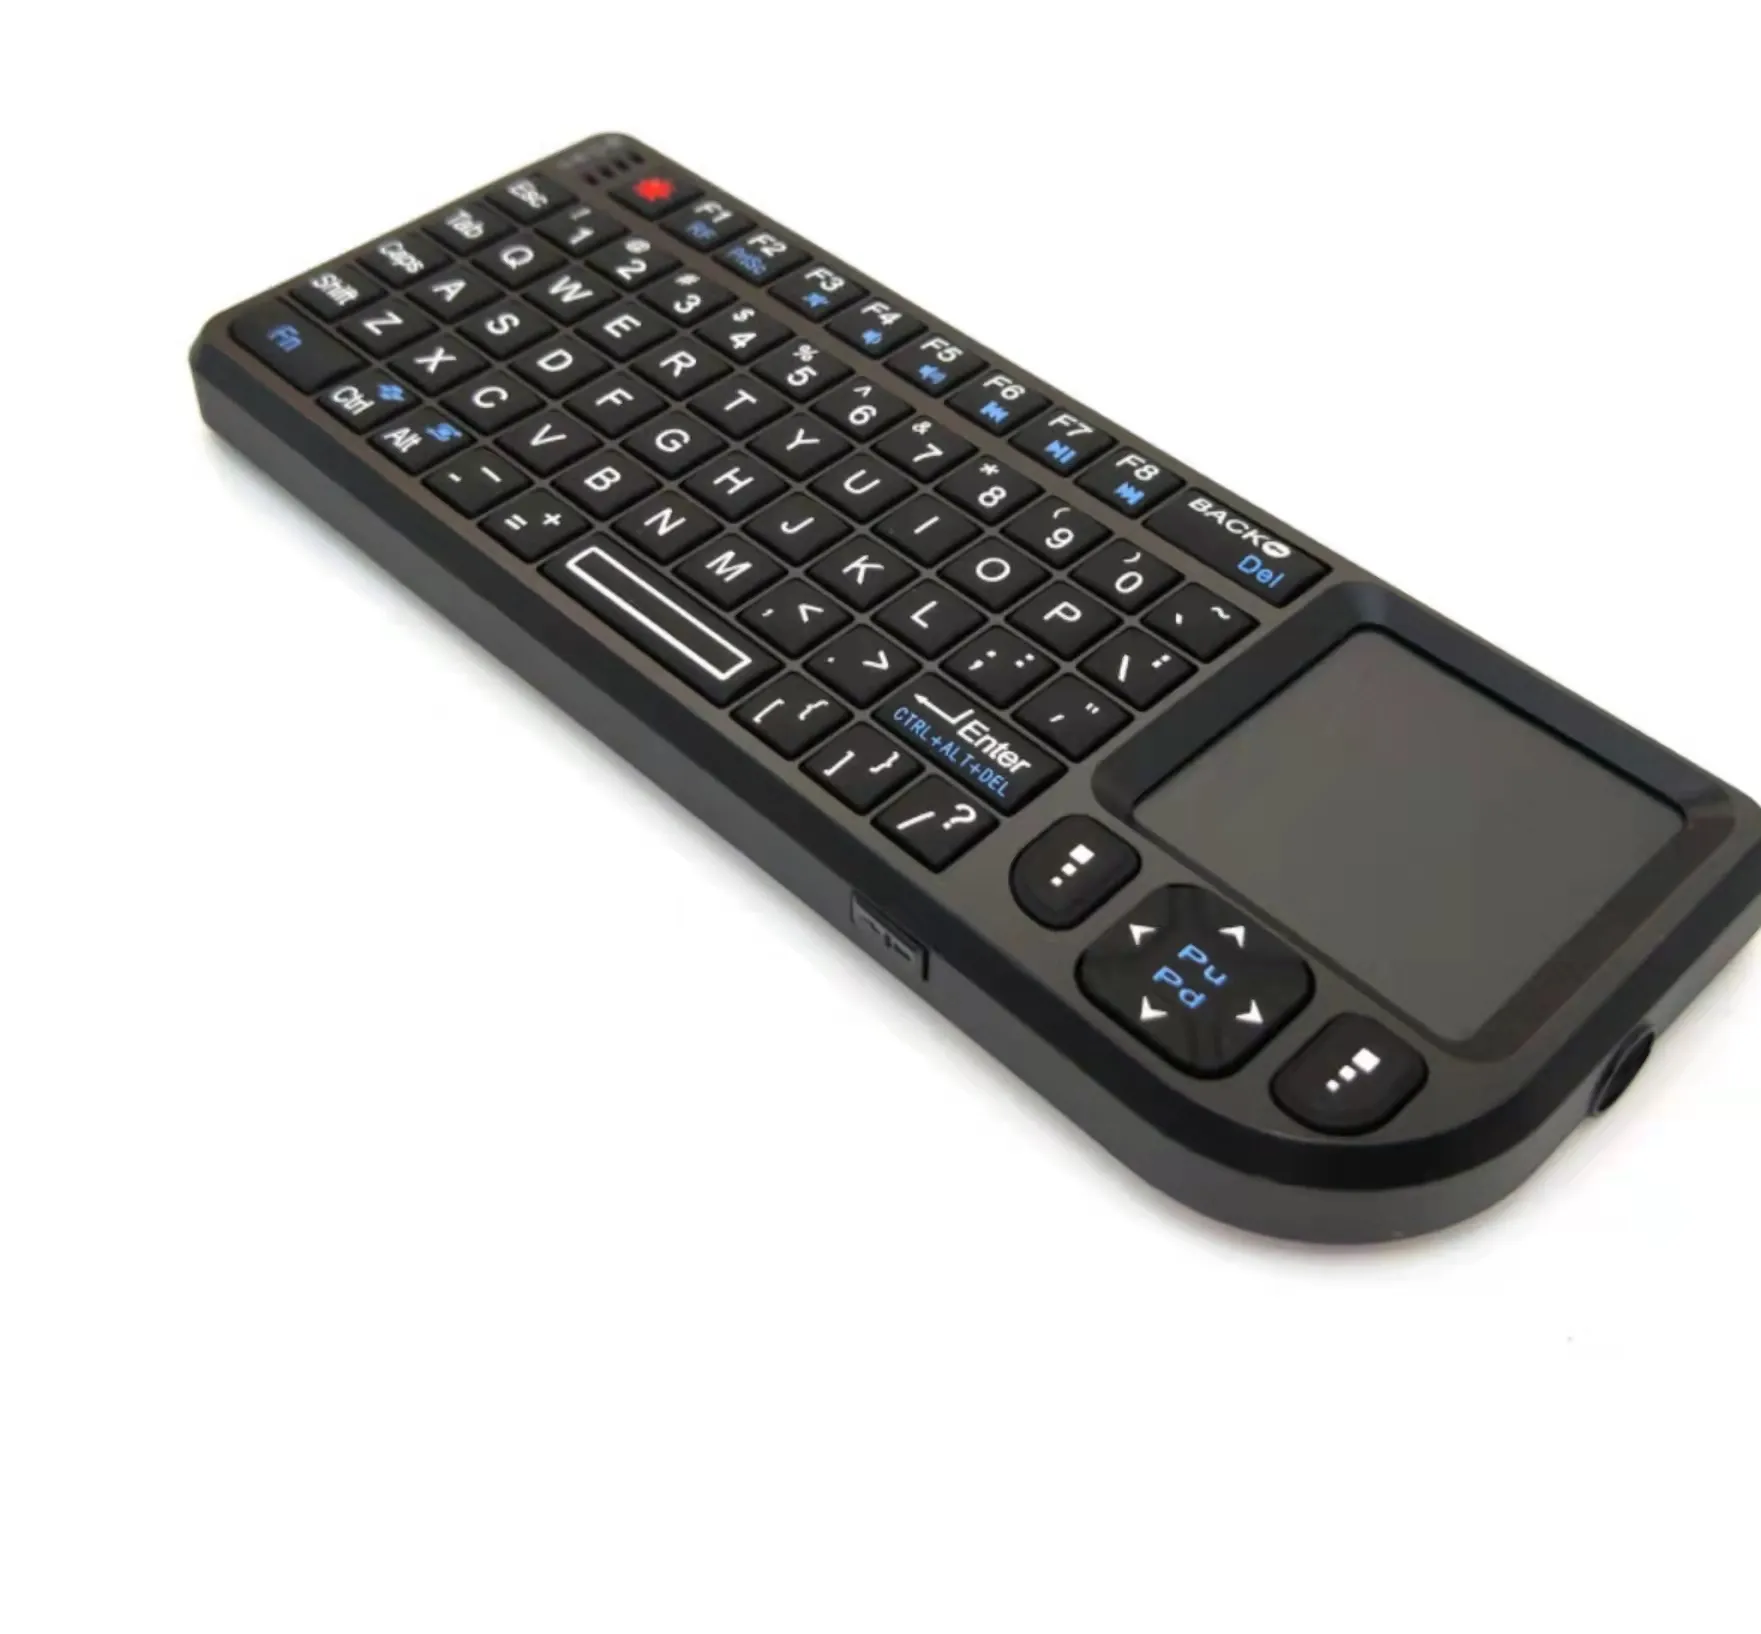 Portable 2.4G Handheld Wireless Keyboard With Touch Pad backlit Bt Mini remote A8 mini keyboard for Laptop